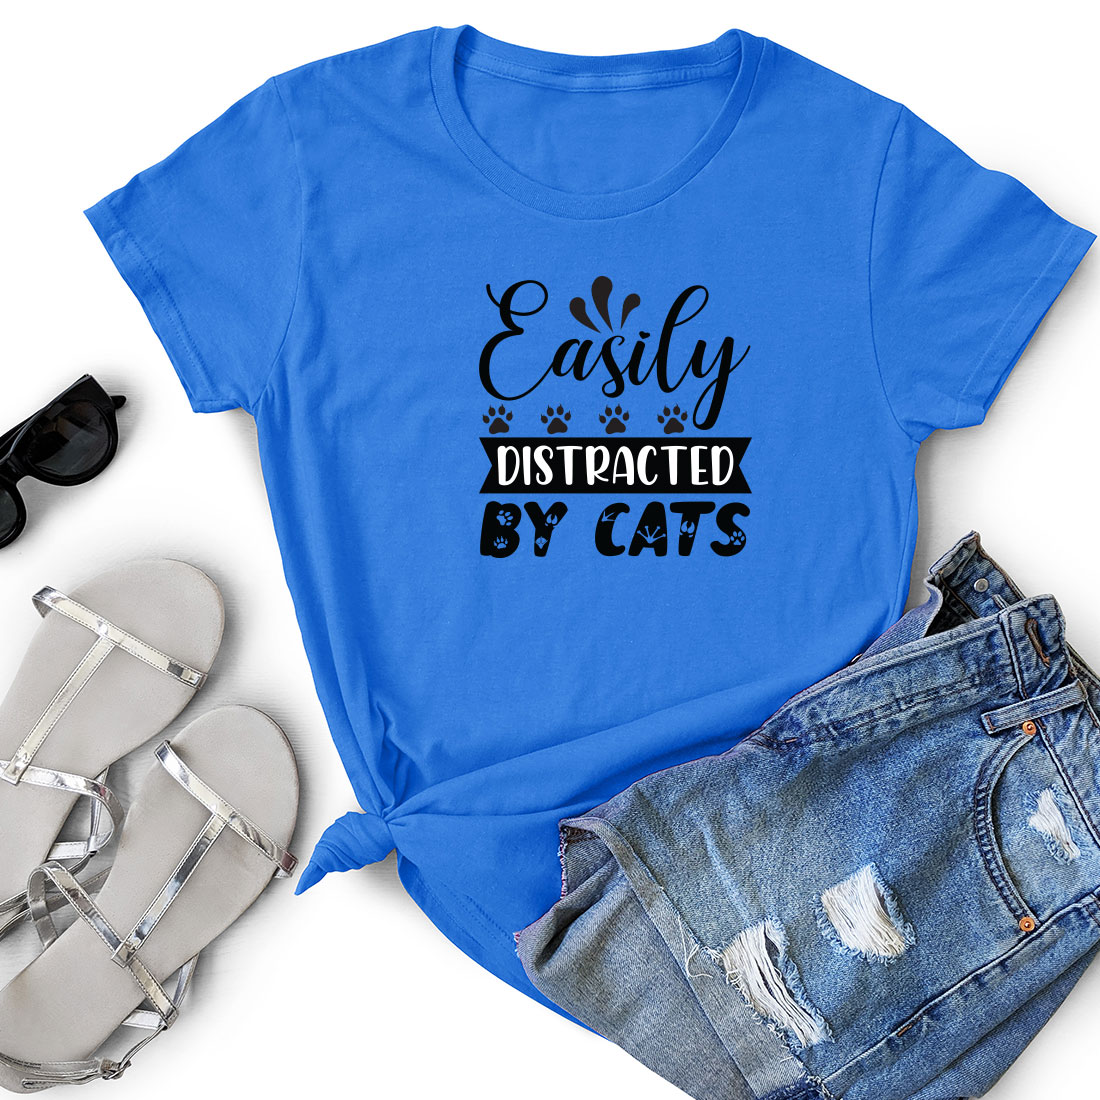 T - shirt that says easily distracted by cats.